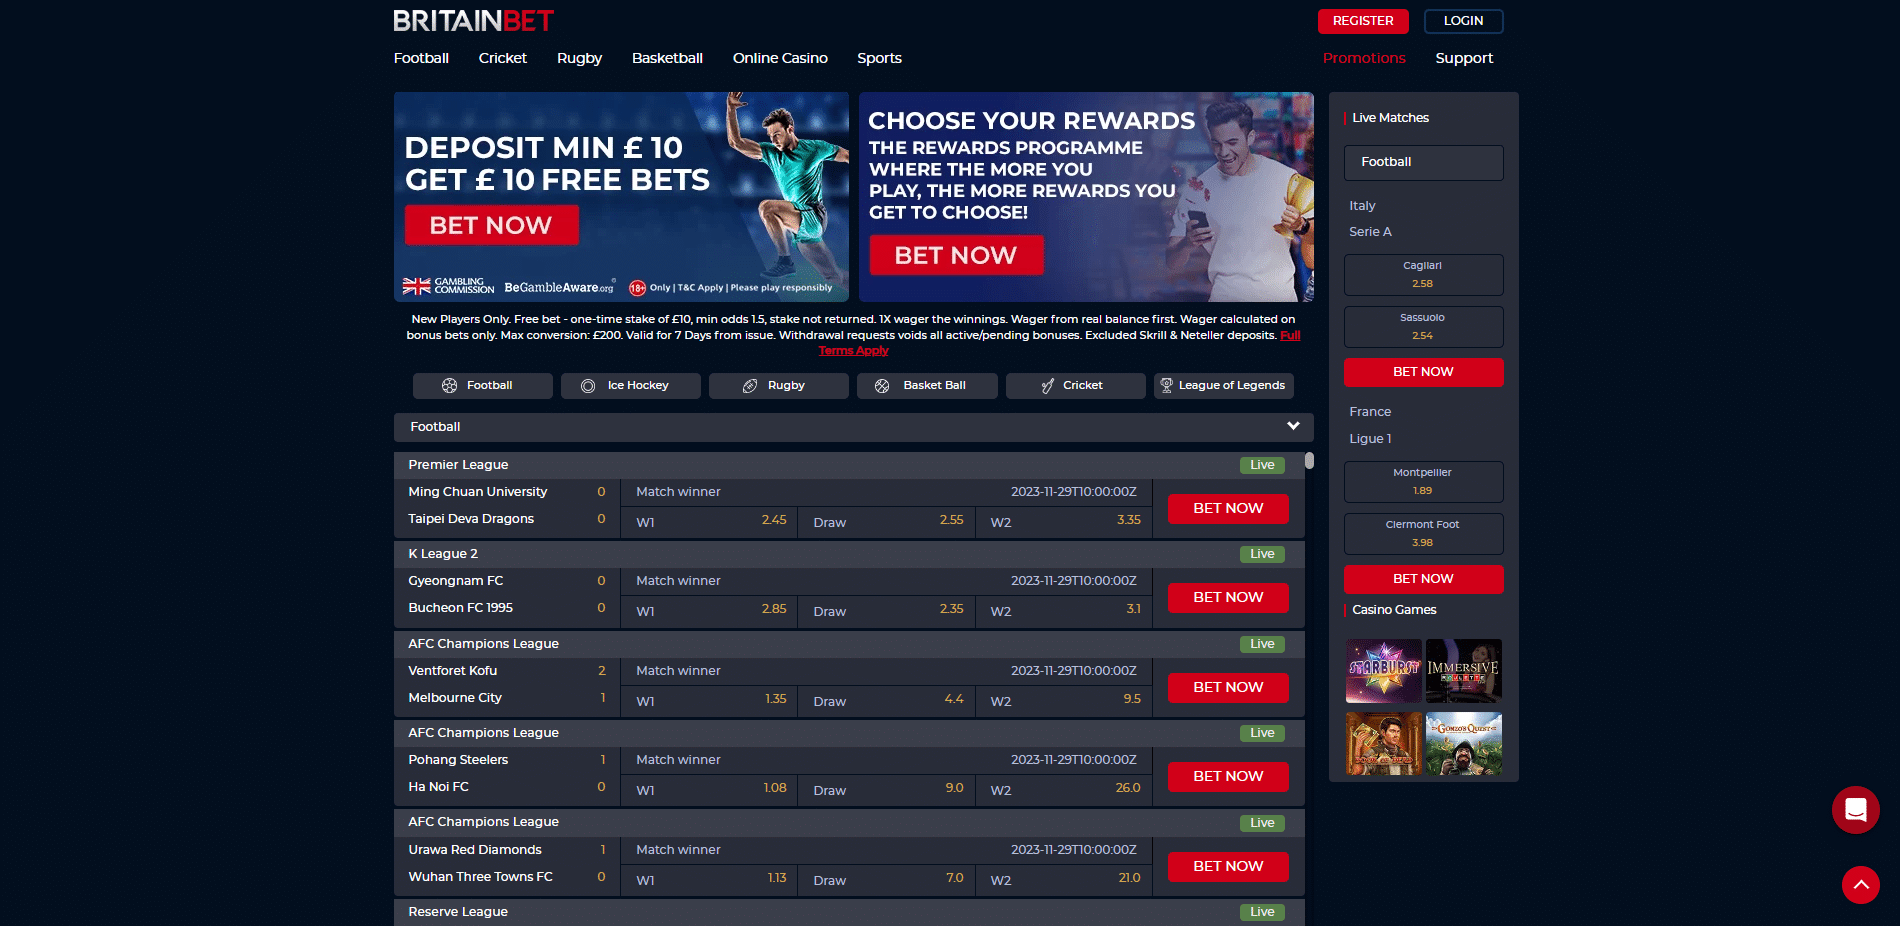 Visit BritainBet and Register for an Account